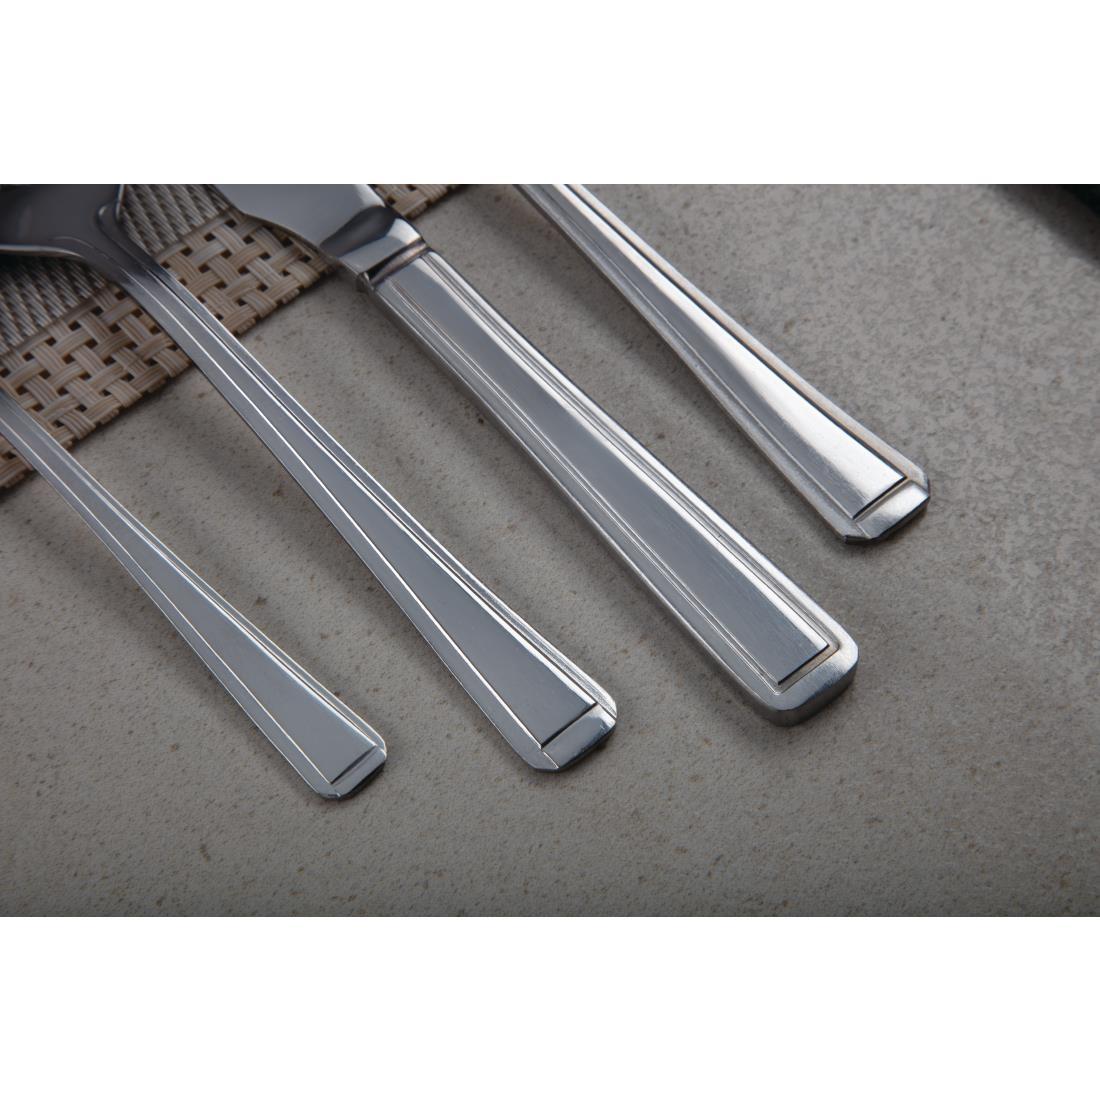 Special Offer Olympia Harley Cutlery Set (Pack of 48) - S613  - 6